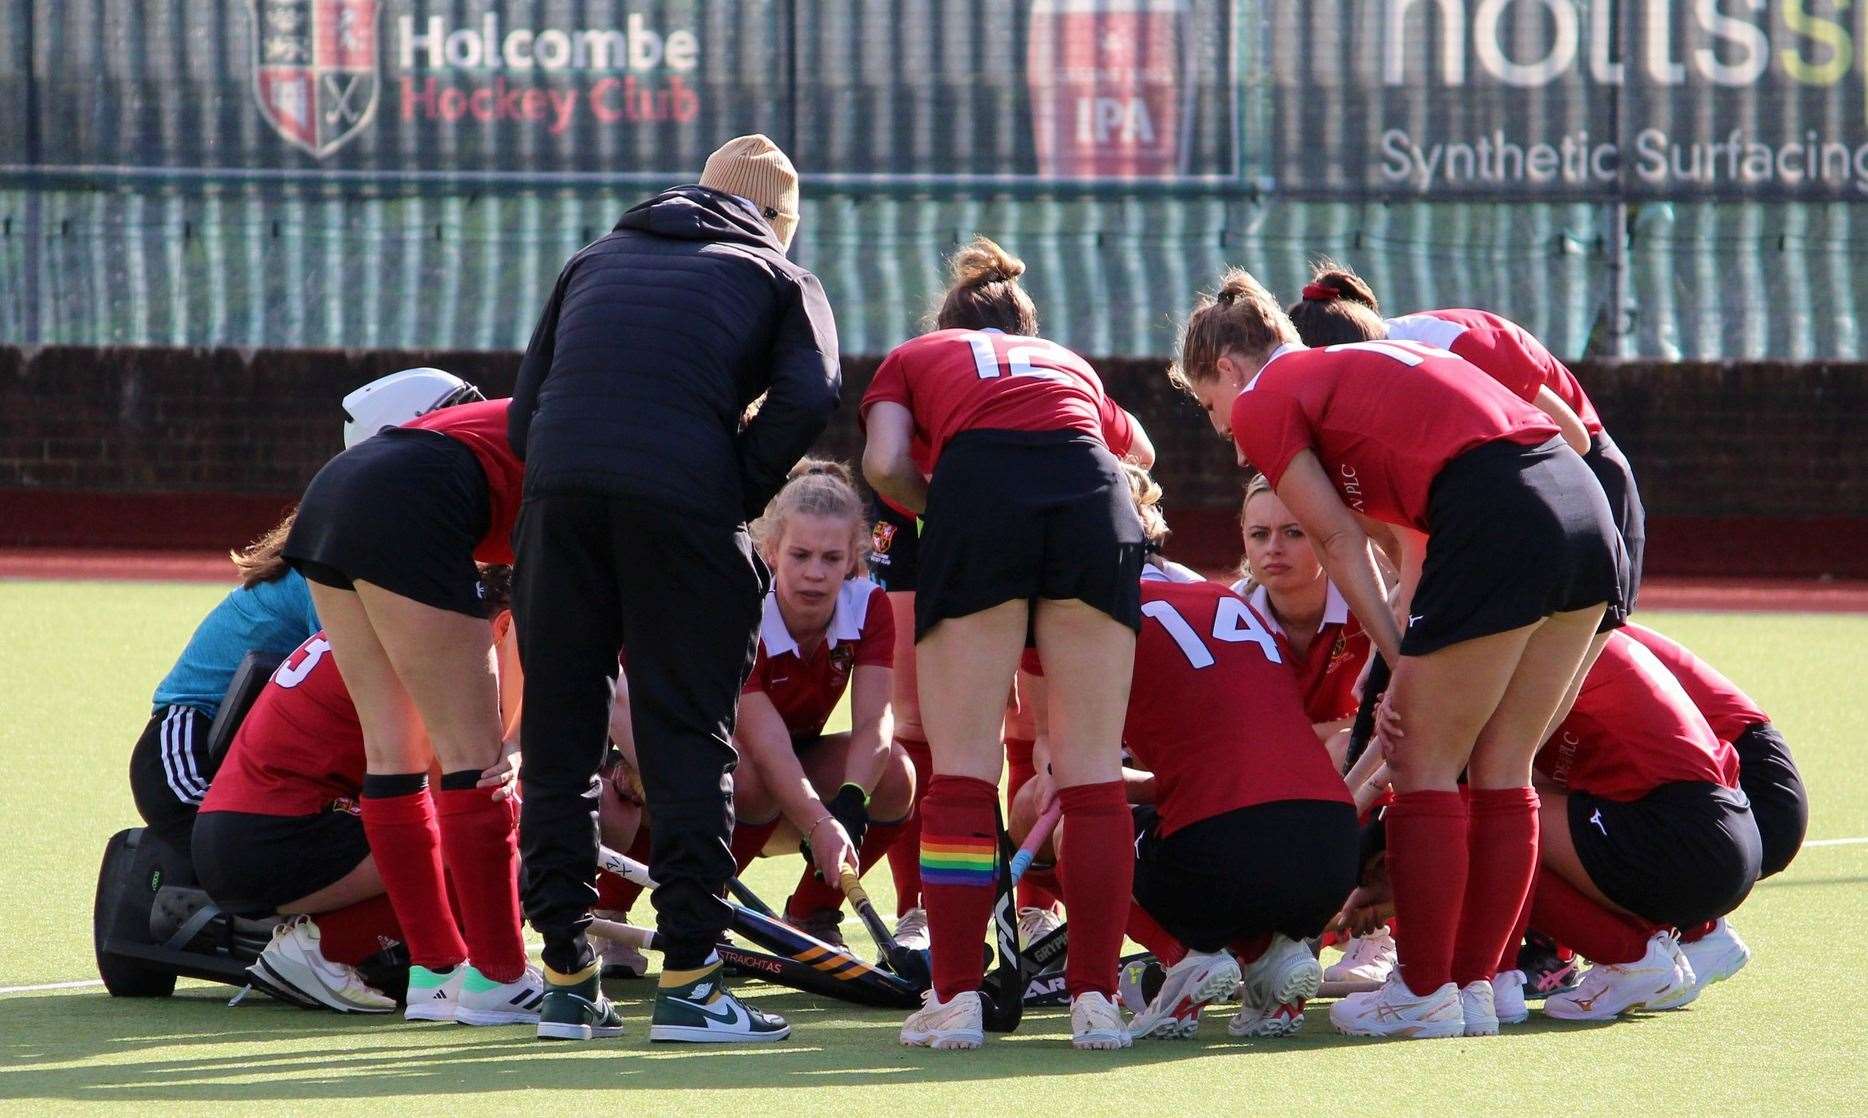 Holcombe Women are second in the Division 1 South table Picture: Jon Goodall